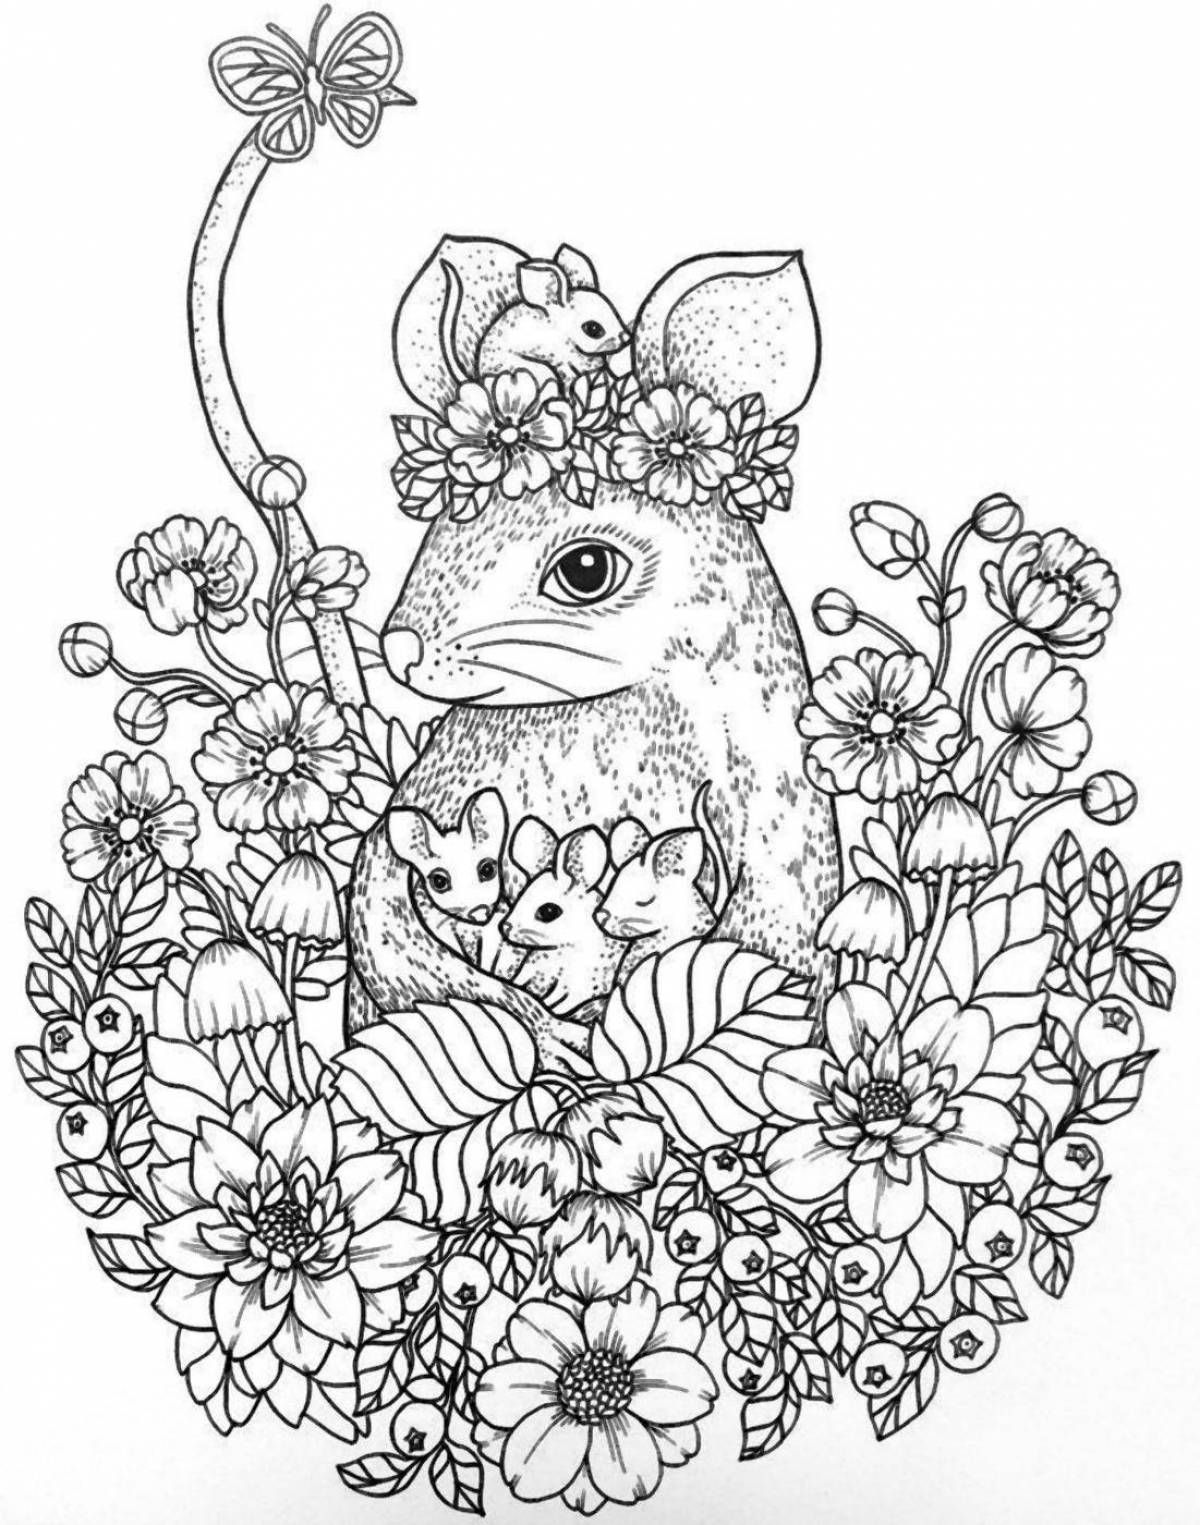 Violent anti-stress coloring for girls animals